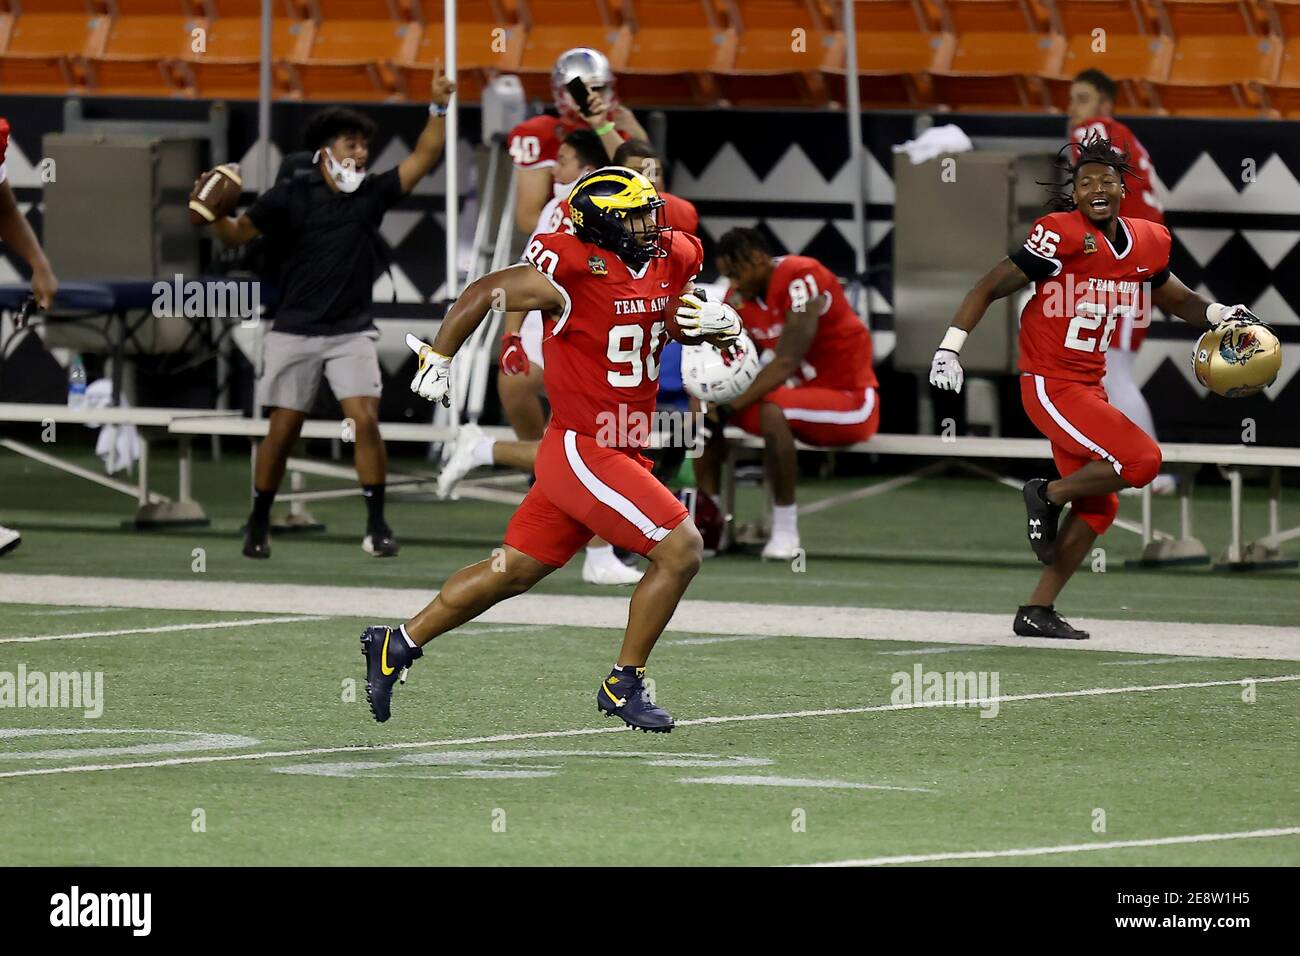 January 31, 2021 - Michigan Wolverines defensive lineman Carlo Kemp #90 rushes downfield and scores a touchdown during the Hula Bowl at Aloha Stadium in Honolulu, HI - Andrew Lee/CSM Stock Photo